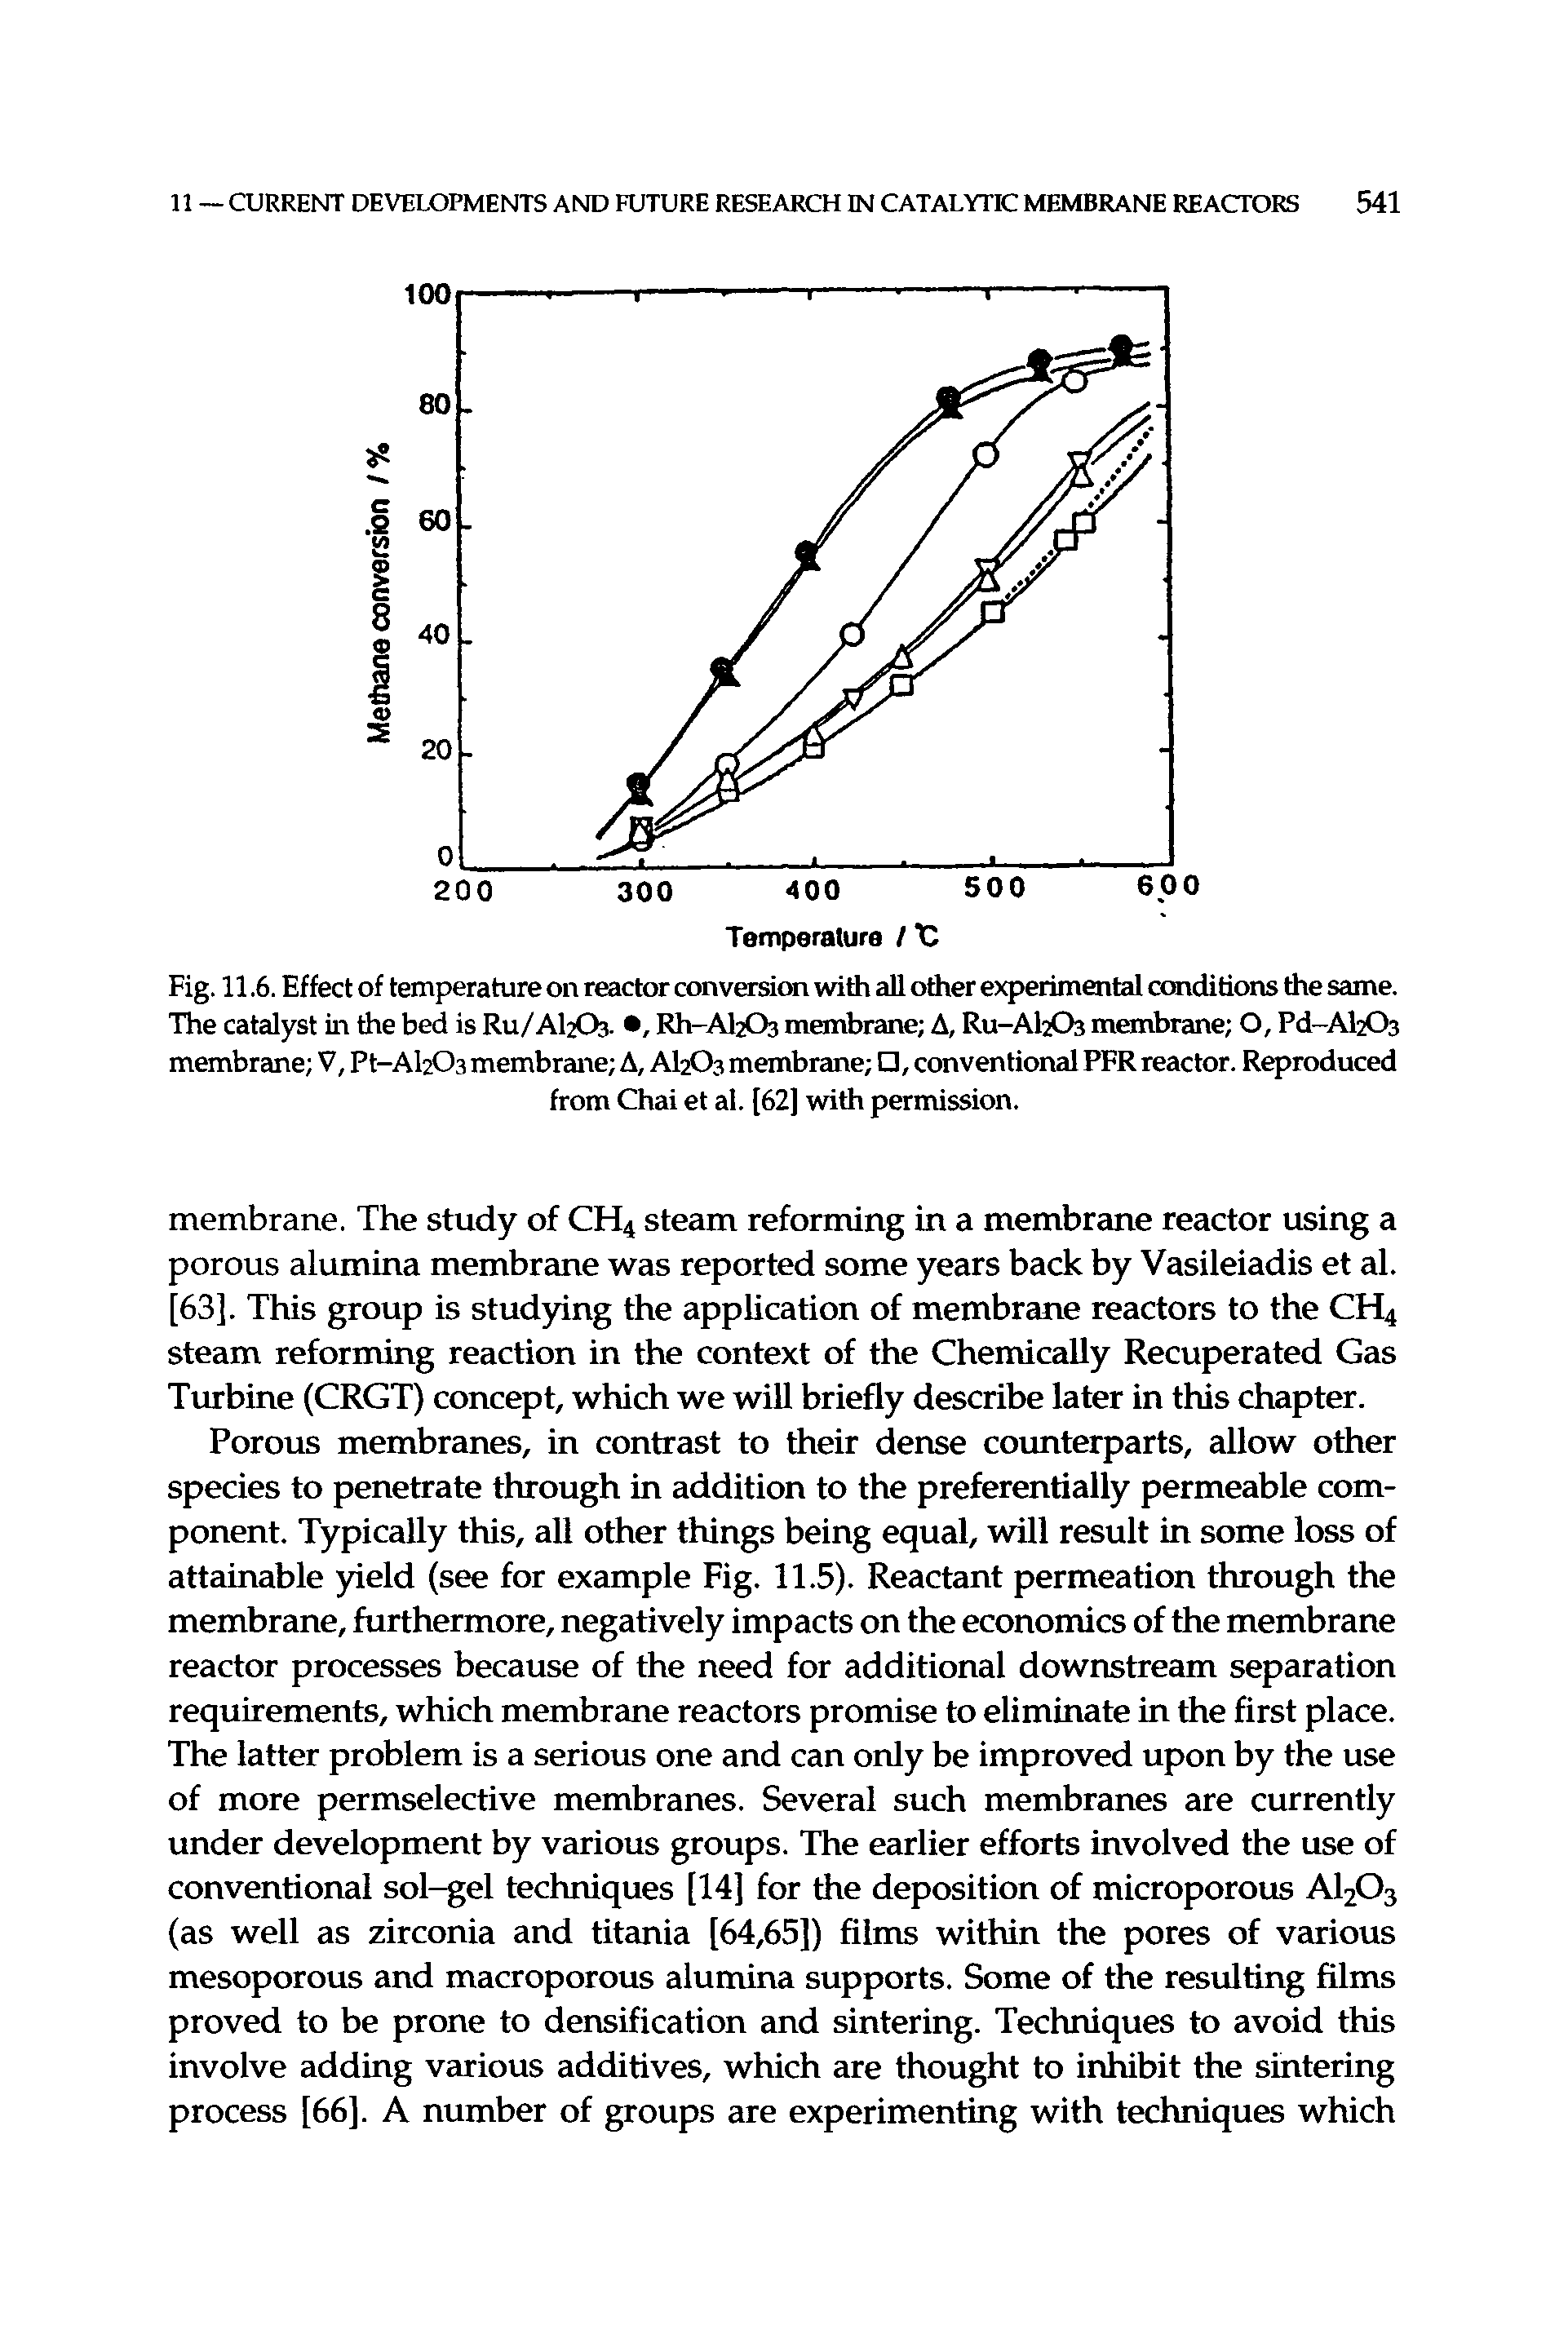 Fig. 11.6. Effect of temperature on reactor conversion with all other experimental conditions the same. The catalyst in the bed is RU/AI2Q3. , Rh-Al203 membrane A, RU-AI2O3 membrane O, Pd-Al203 membrane V, Pt-AkOs membrane A, AI2O3 membrane , conventional PFR reactor. Reproduced...